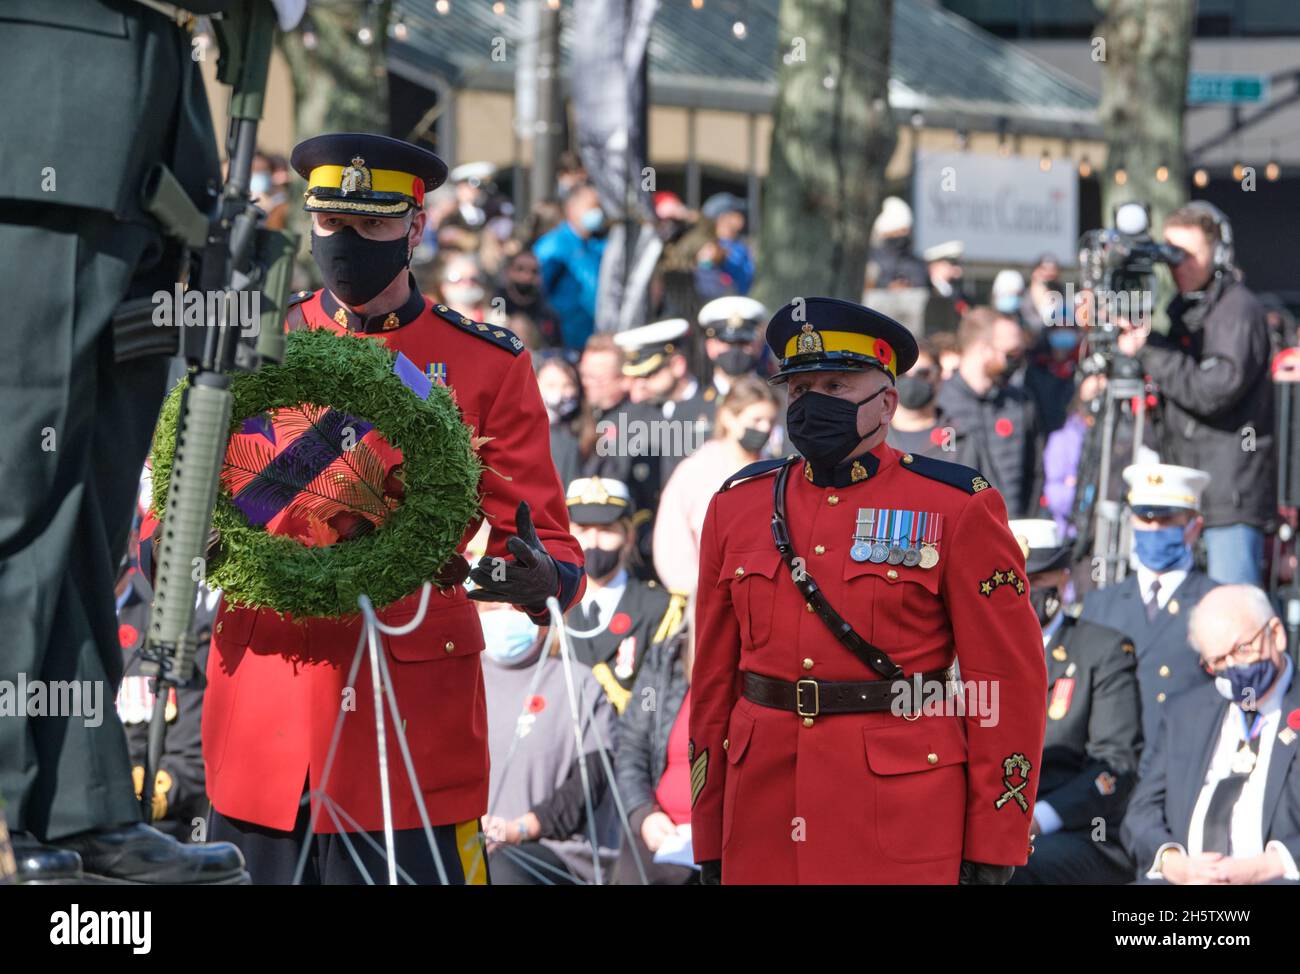 Halifax, Nova Scotia, Canada. November 11th, 2021. Remembrance Day ceremony on the 100th anniversary of the remembrance poppy in Canada, held at the Halifax Cenotaph. Representant of the RCMP laying a wreath on the war memorial. Credit: meanderingemu/Alamy Live News Stock Photo